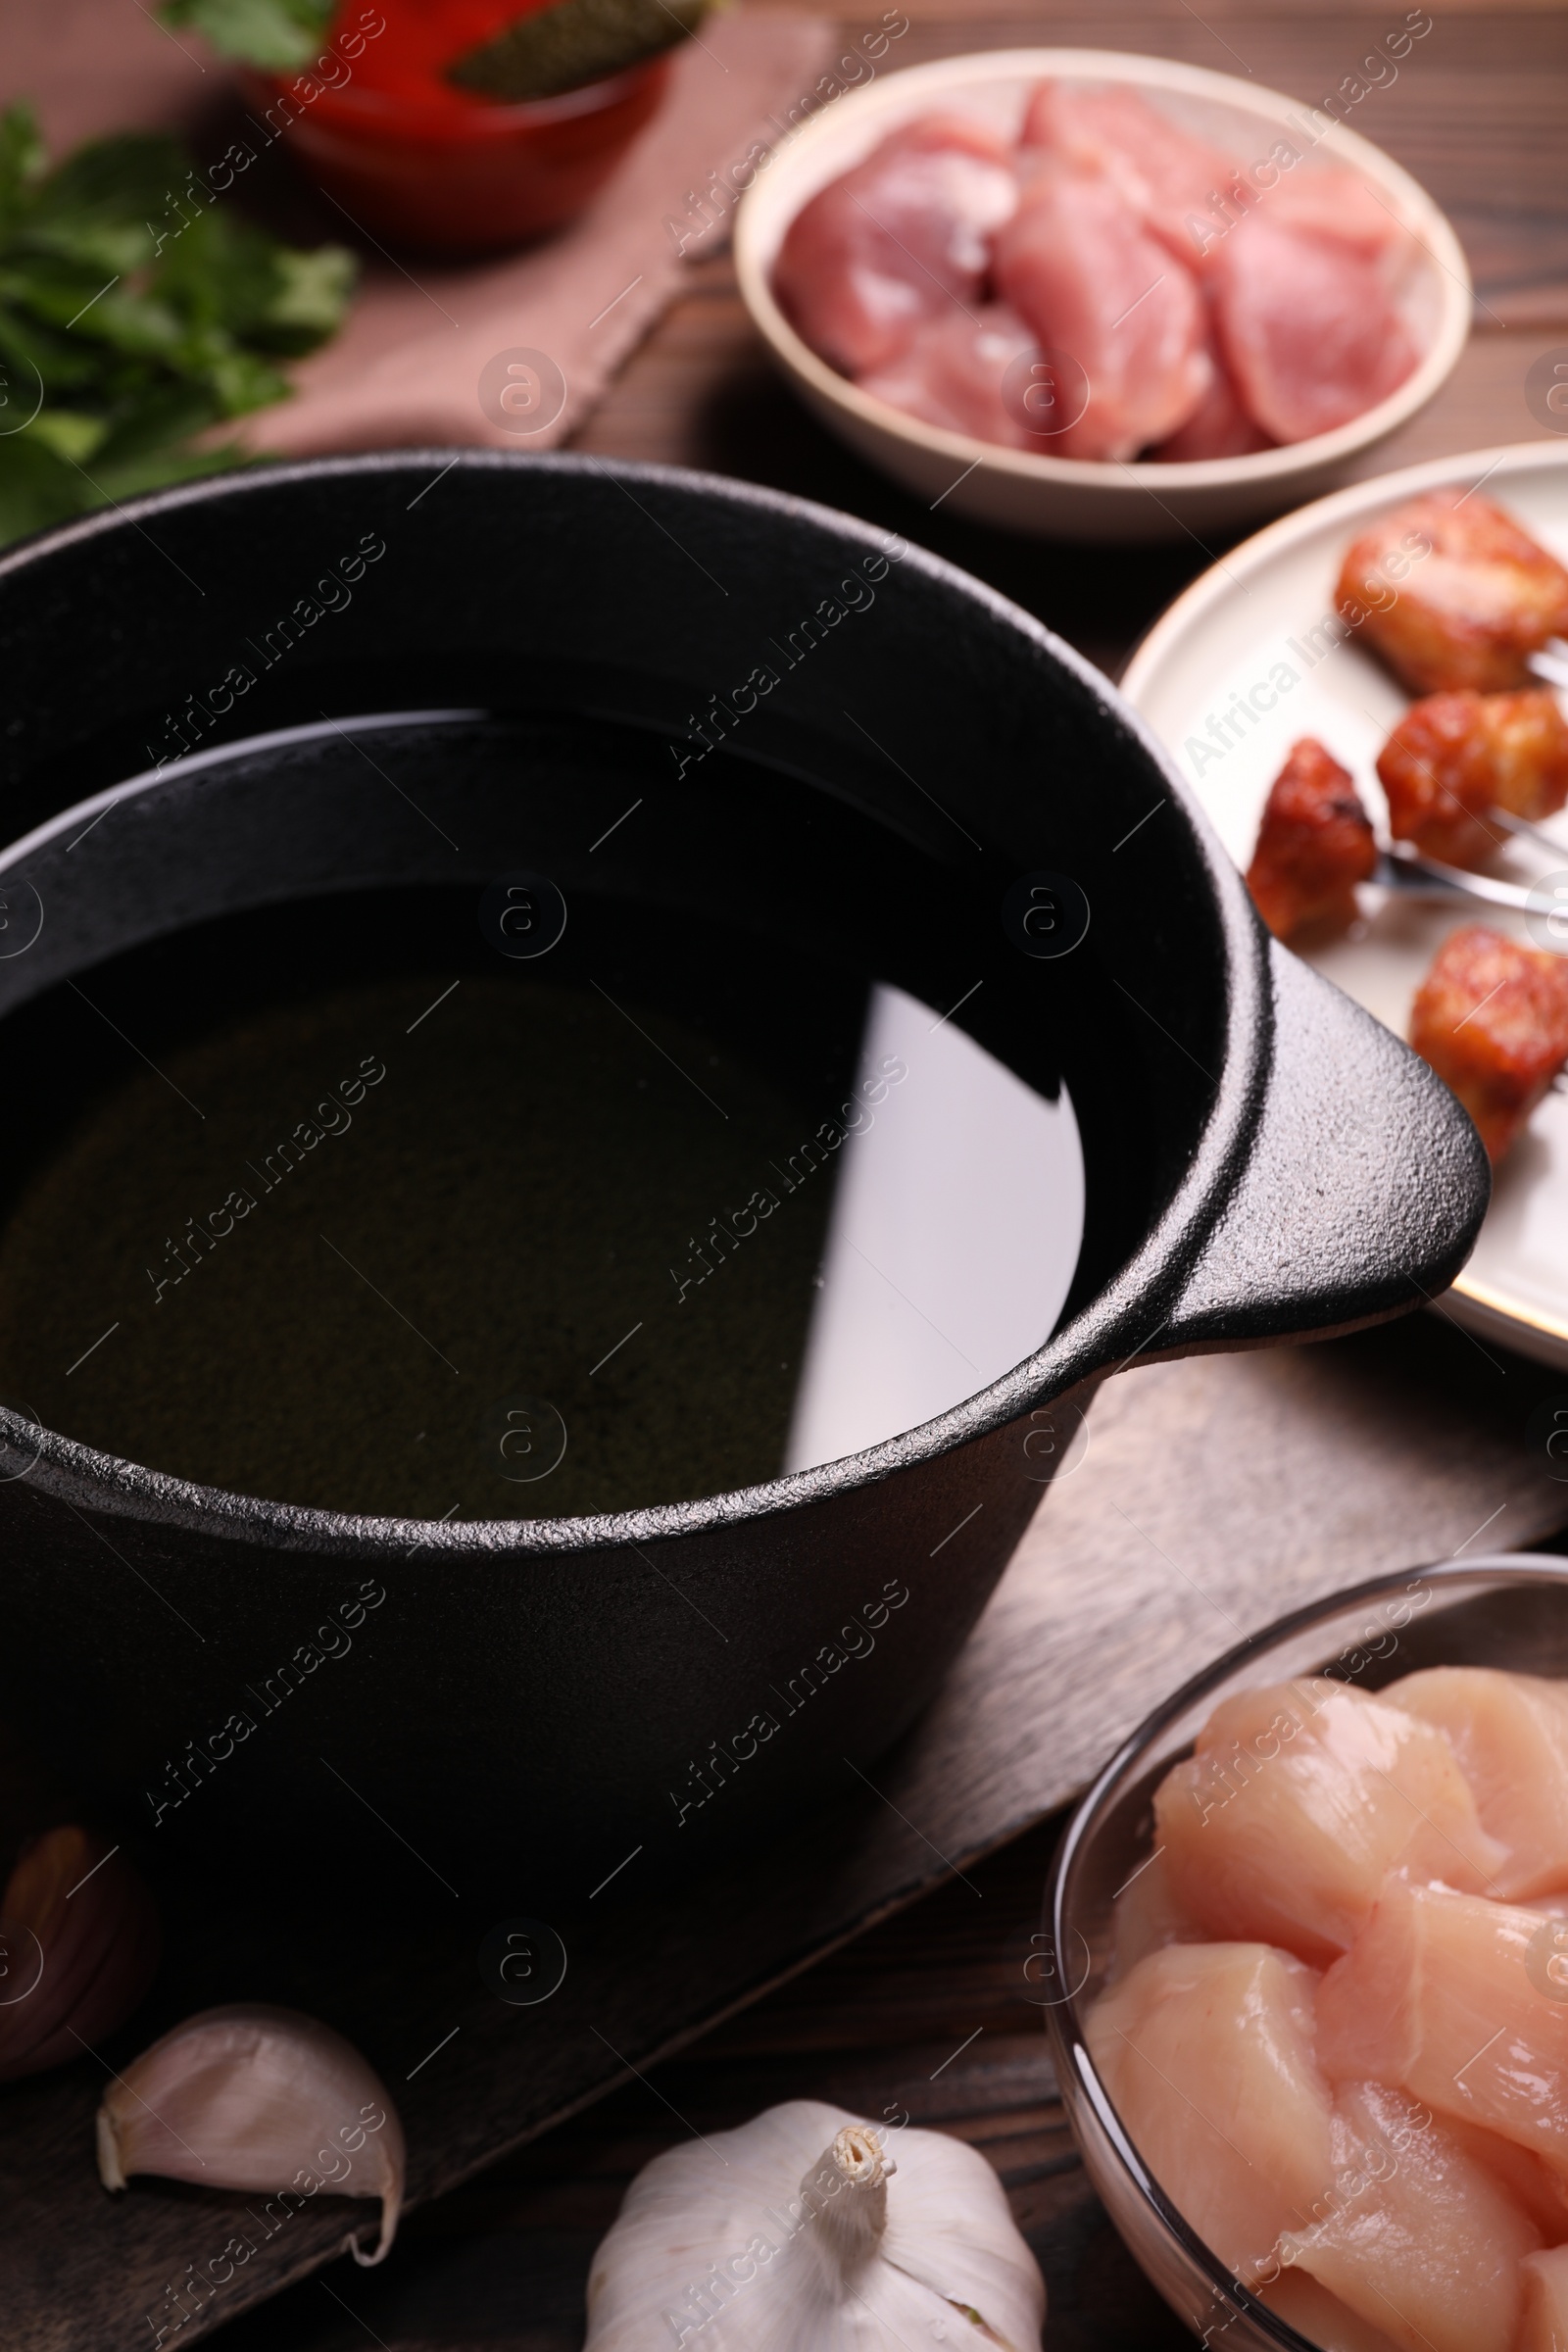 Photo of Fondue pot, forks with fried meat pieces and other products on wooden table